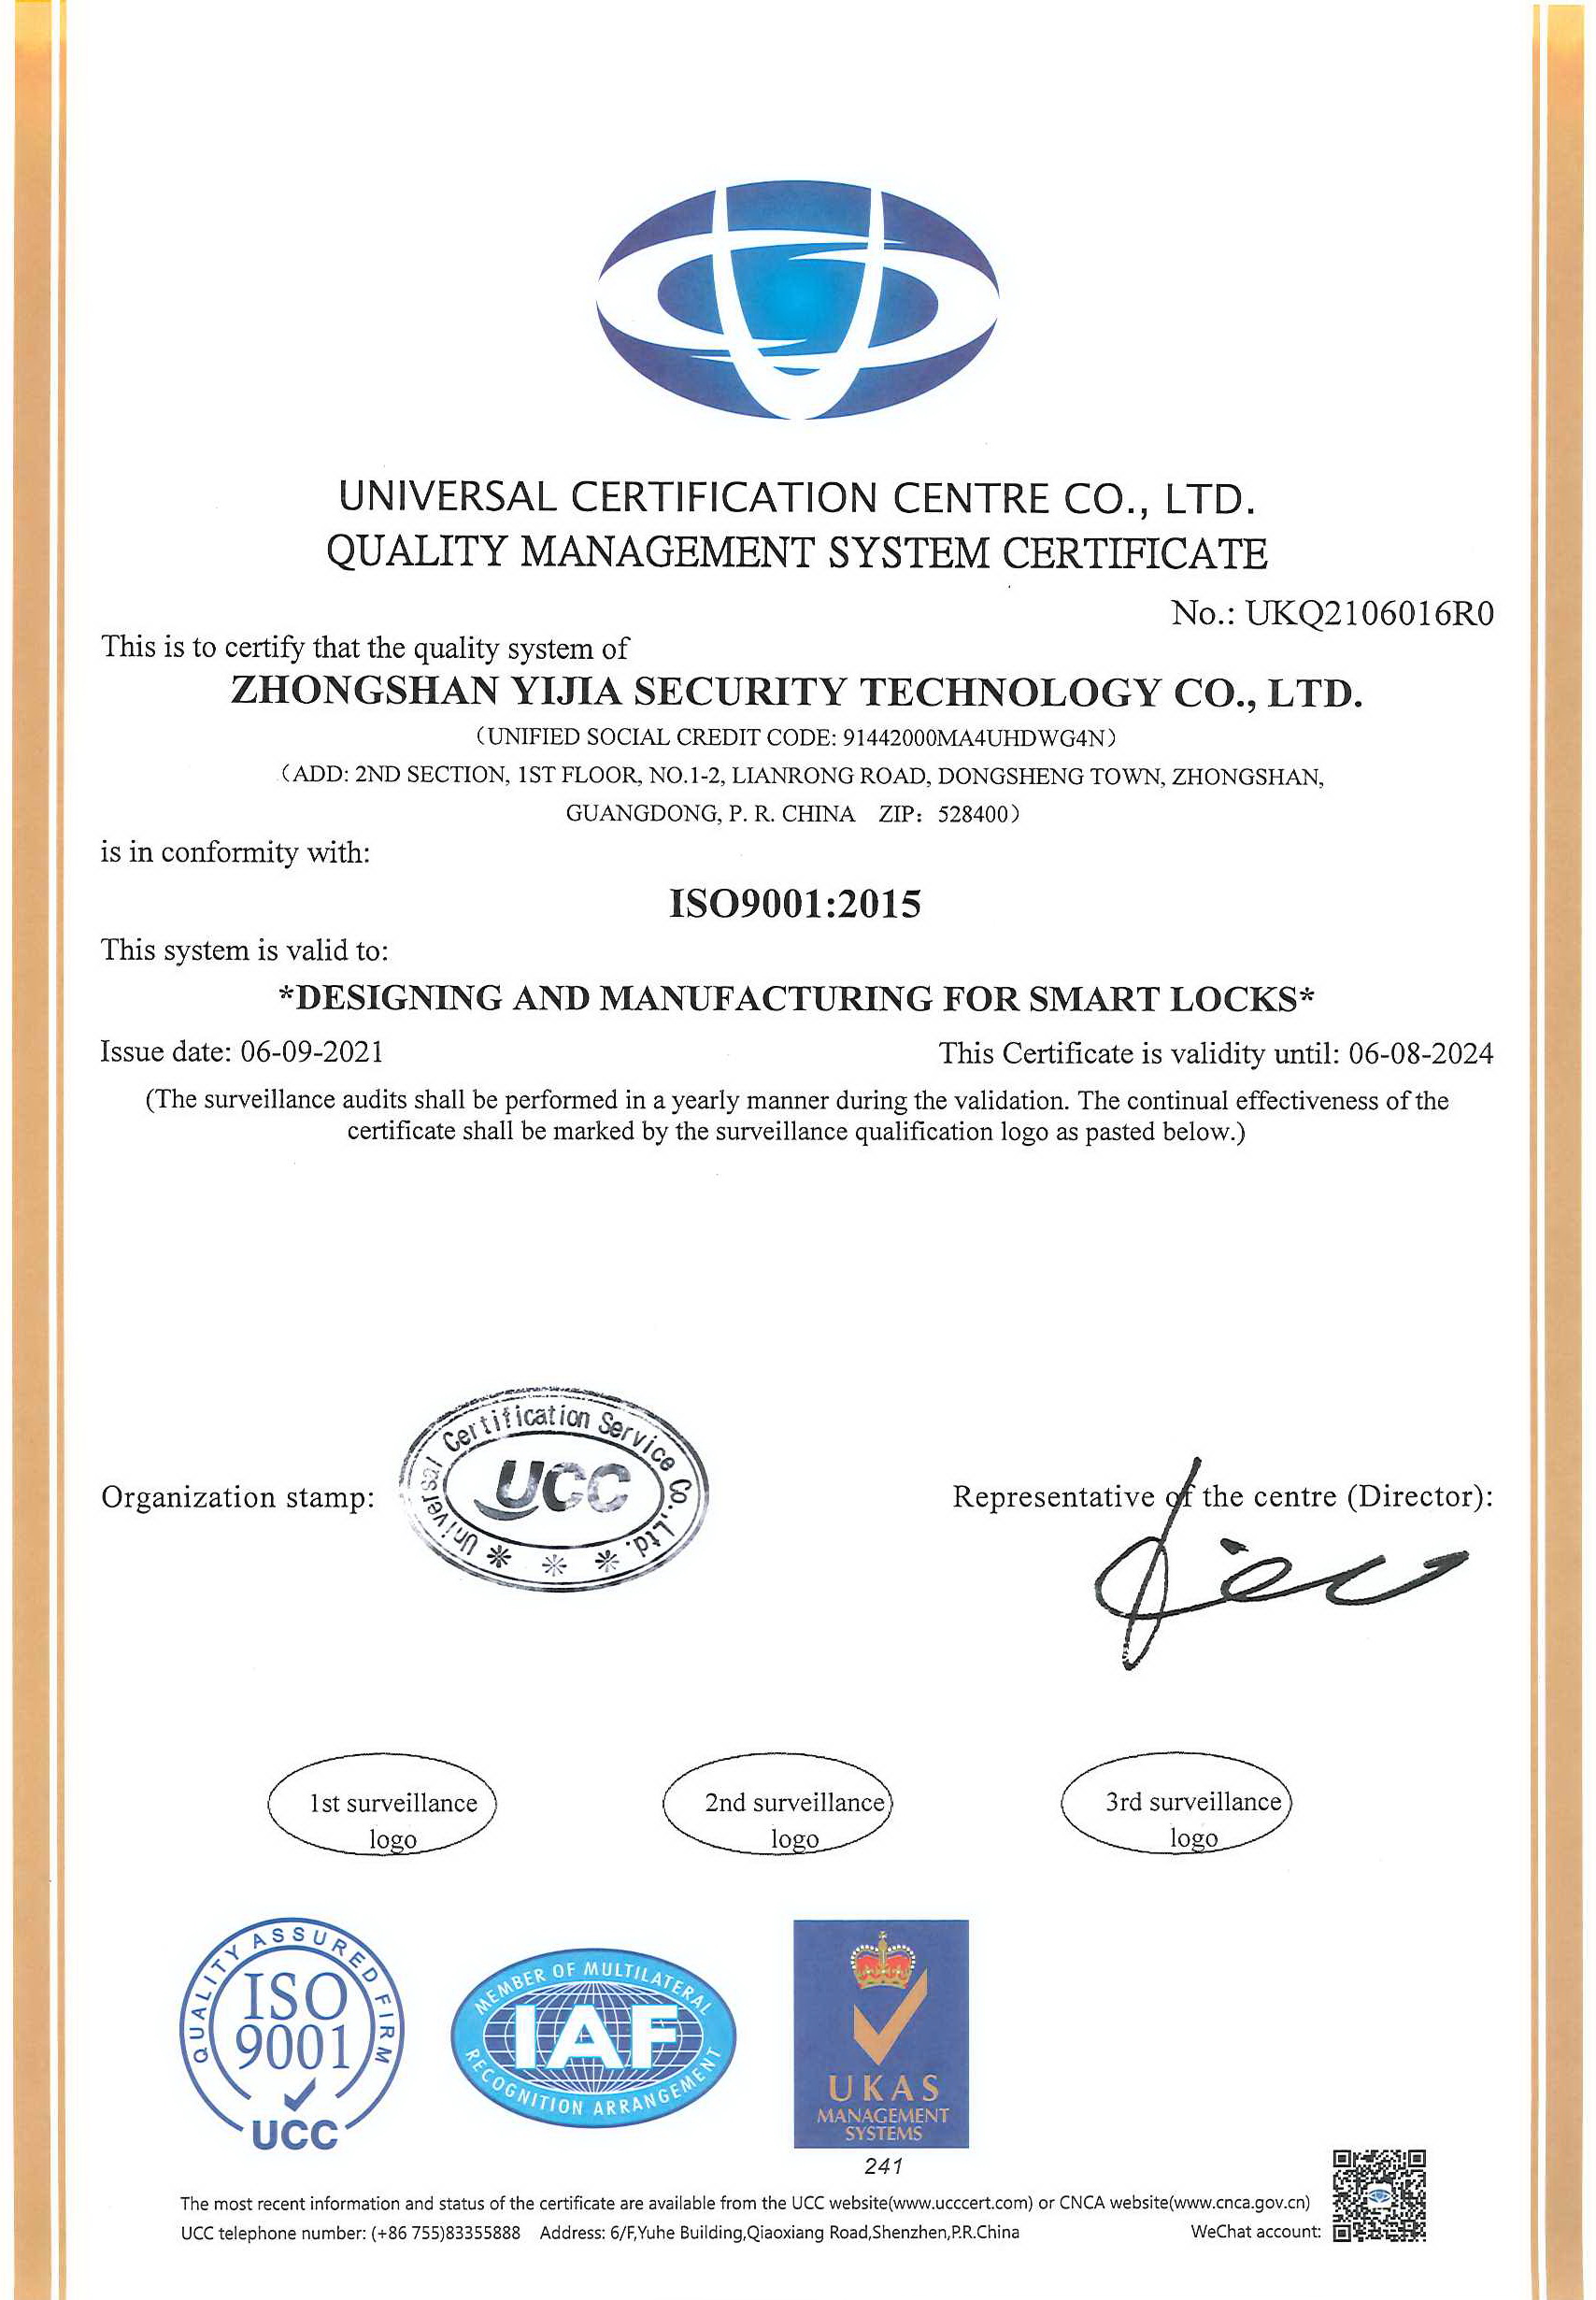 New ISO Certificate Just Arrived